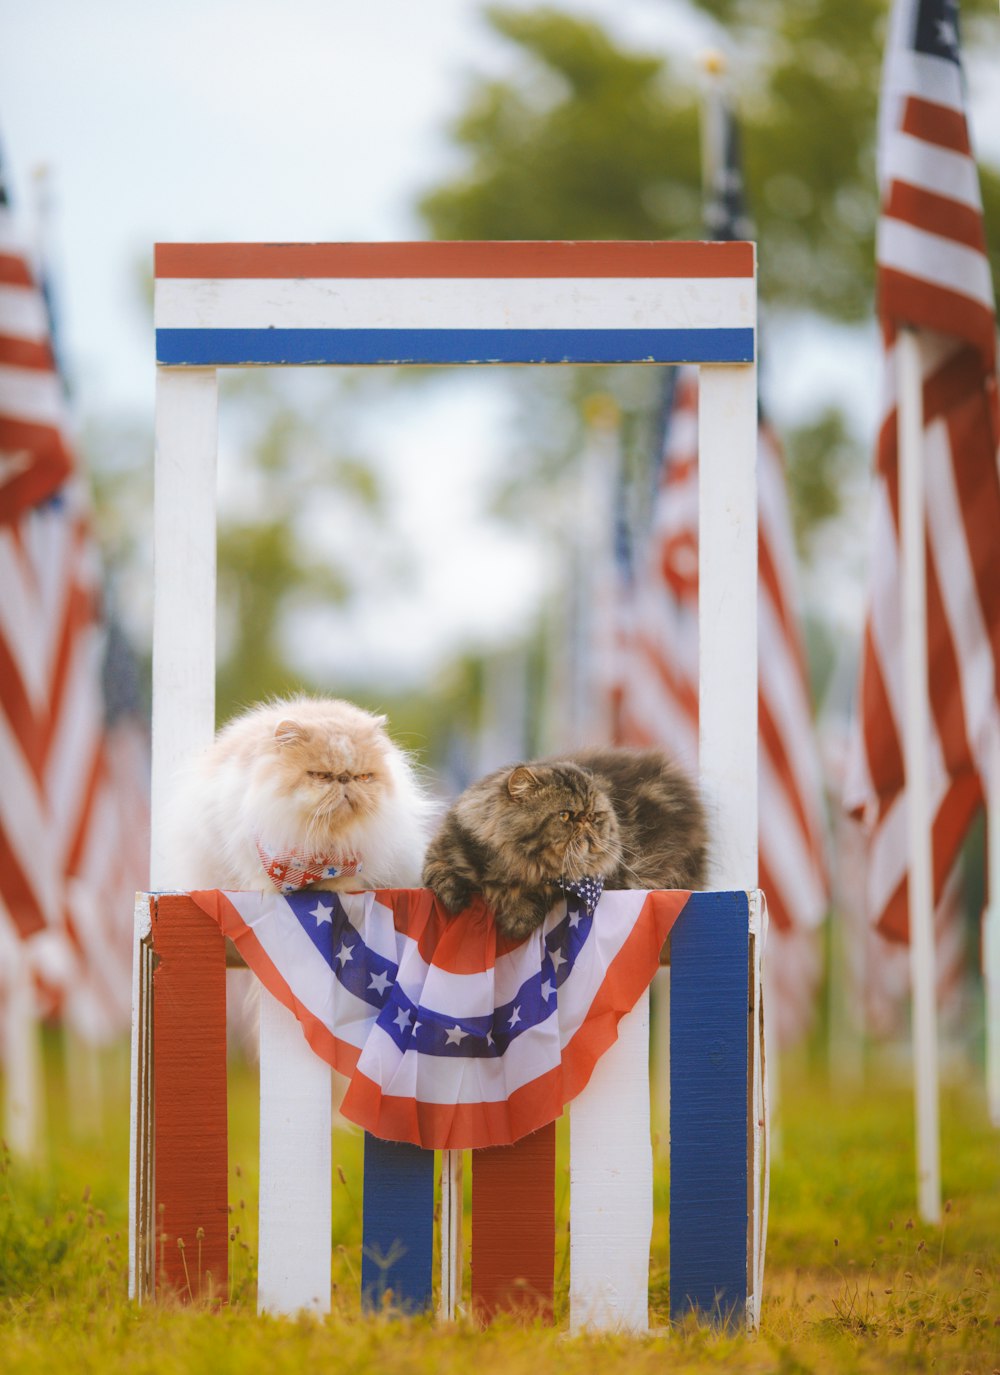 a dog sitting in a chair with a flag behind it